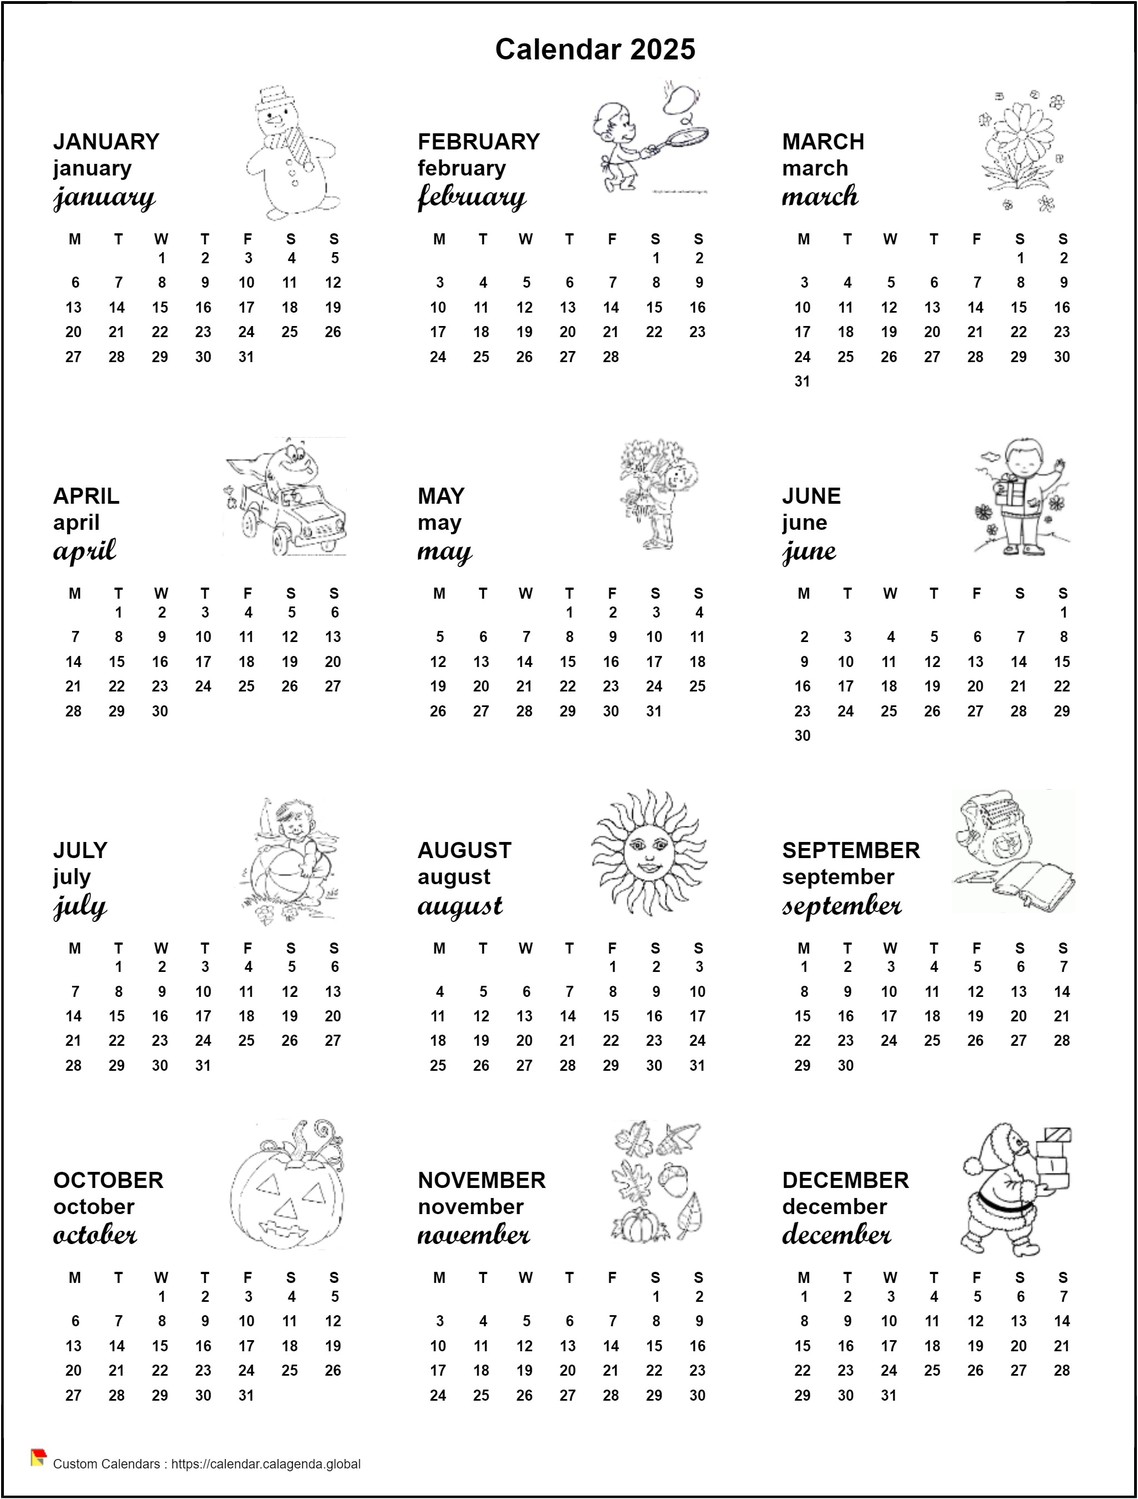 Calendar 2035 annual maternal and primary school